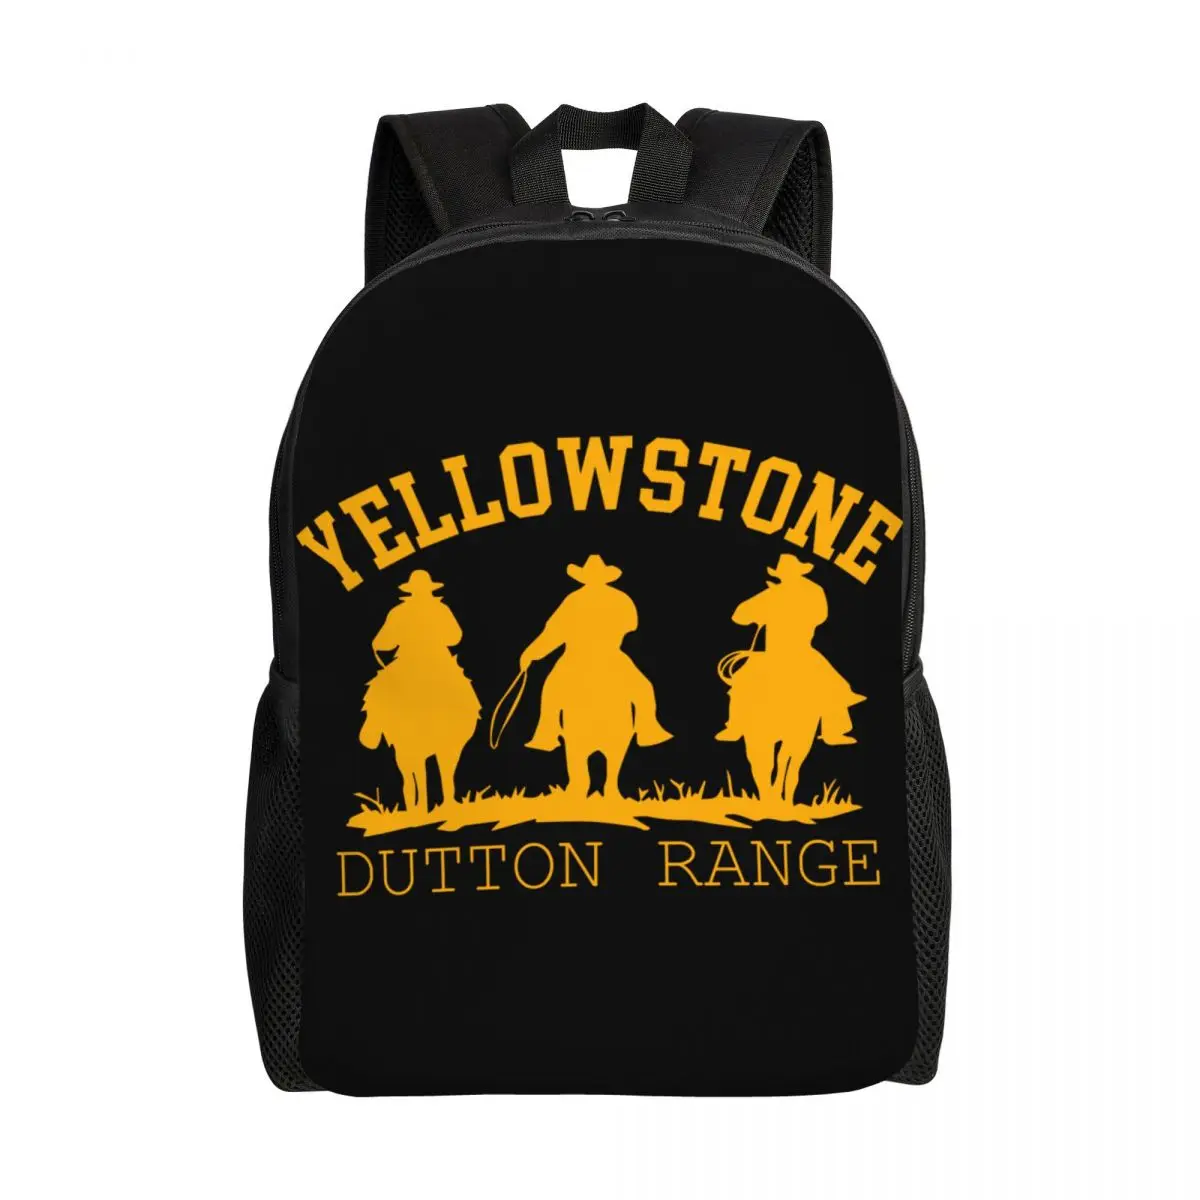 

Yellowstone Backpacks for Men Women School College Student Bookbag Fits 15 Inch Laptop Dutton Ranch Bags